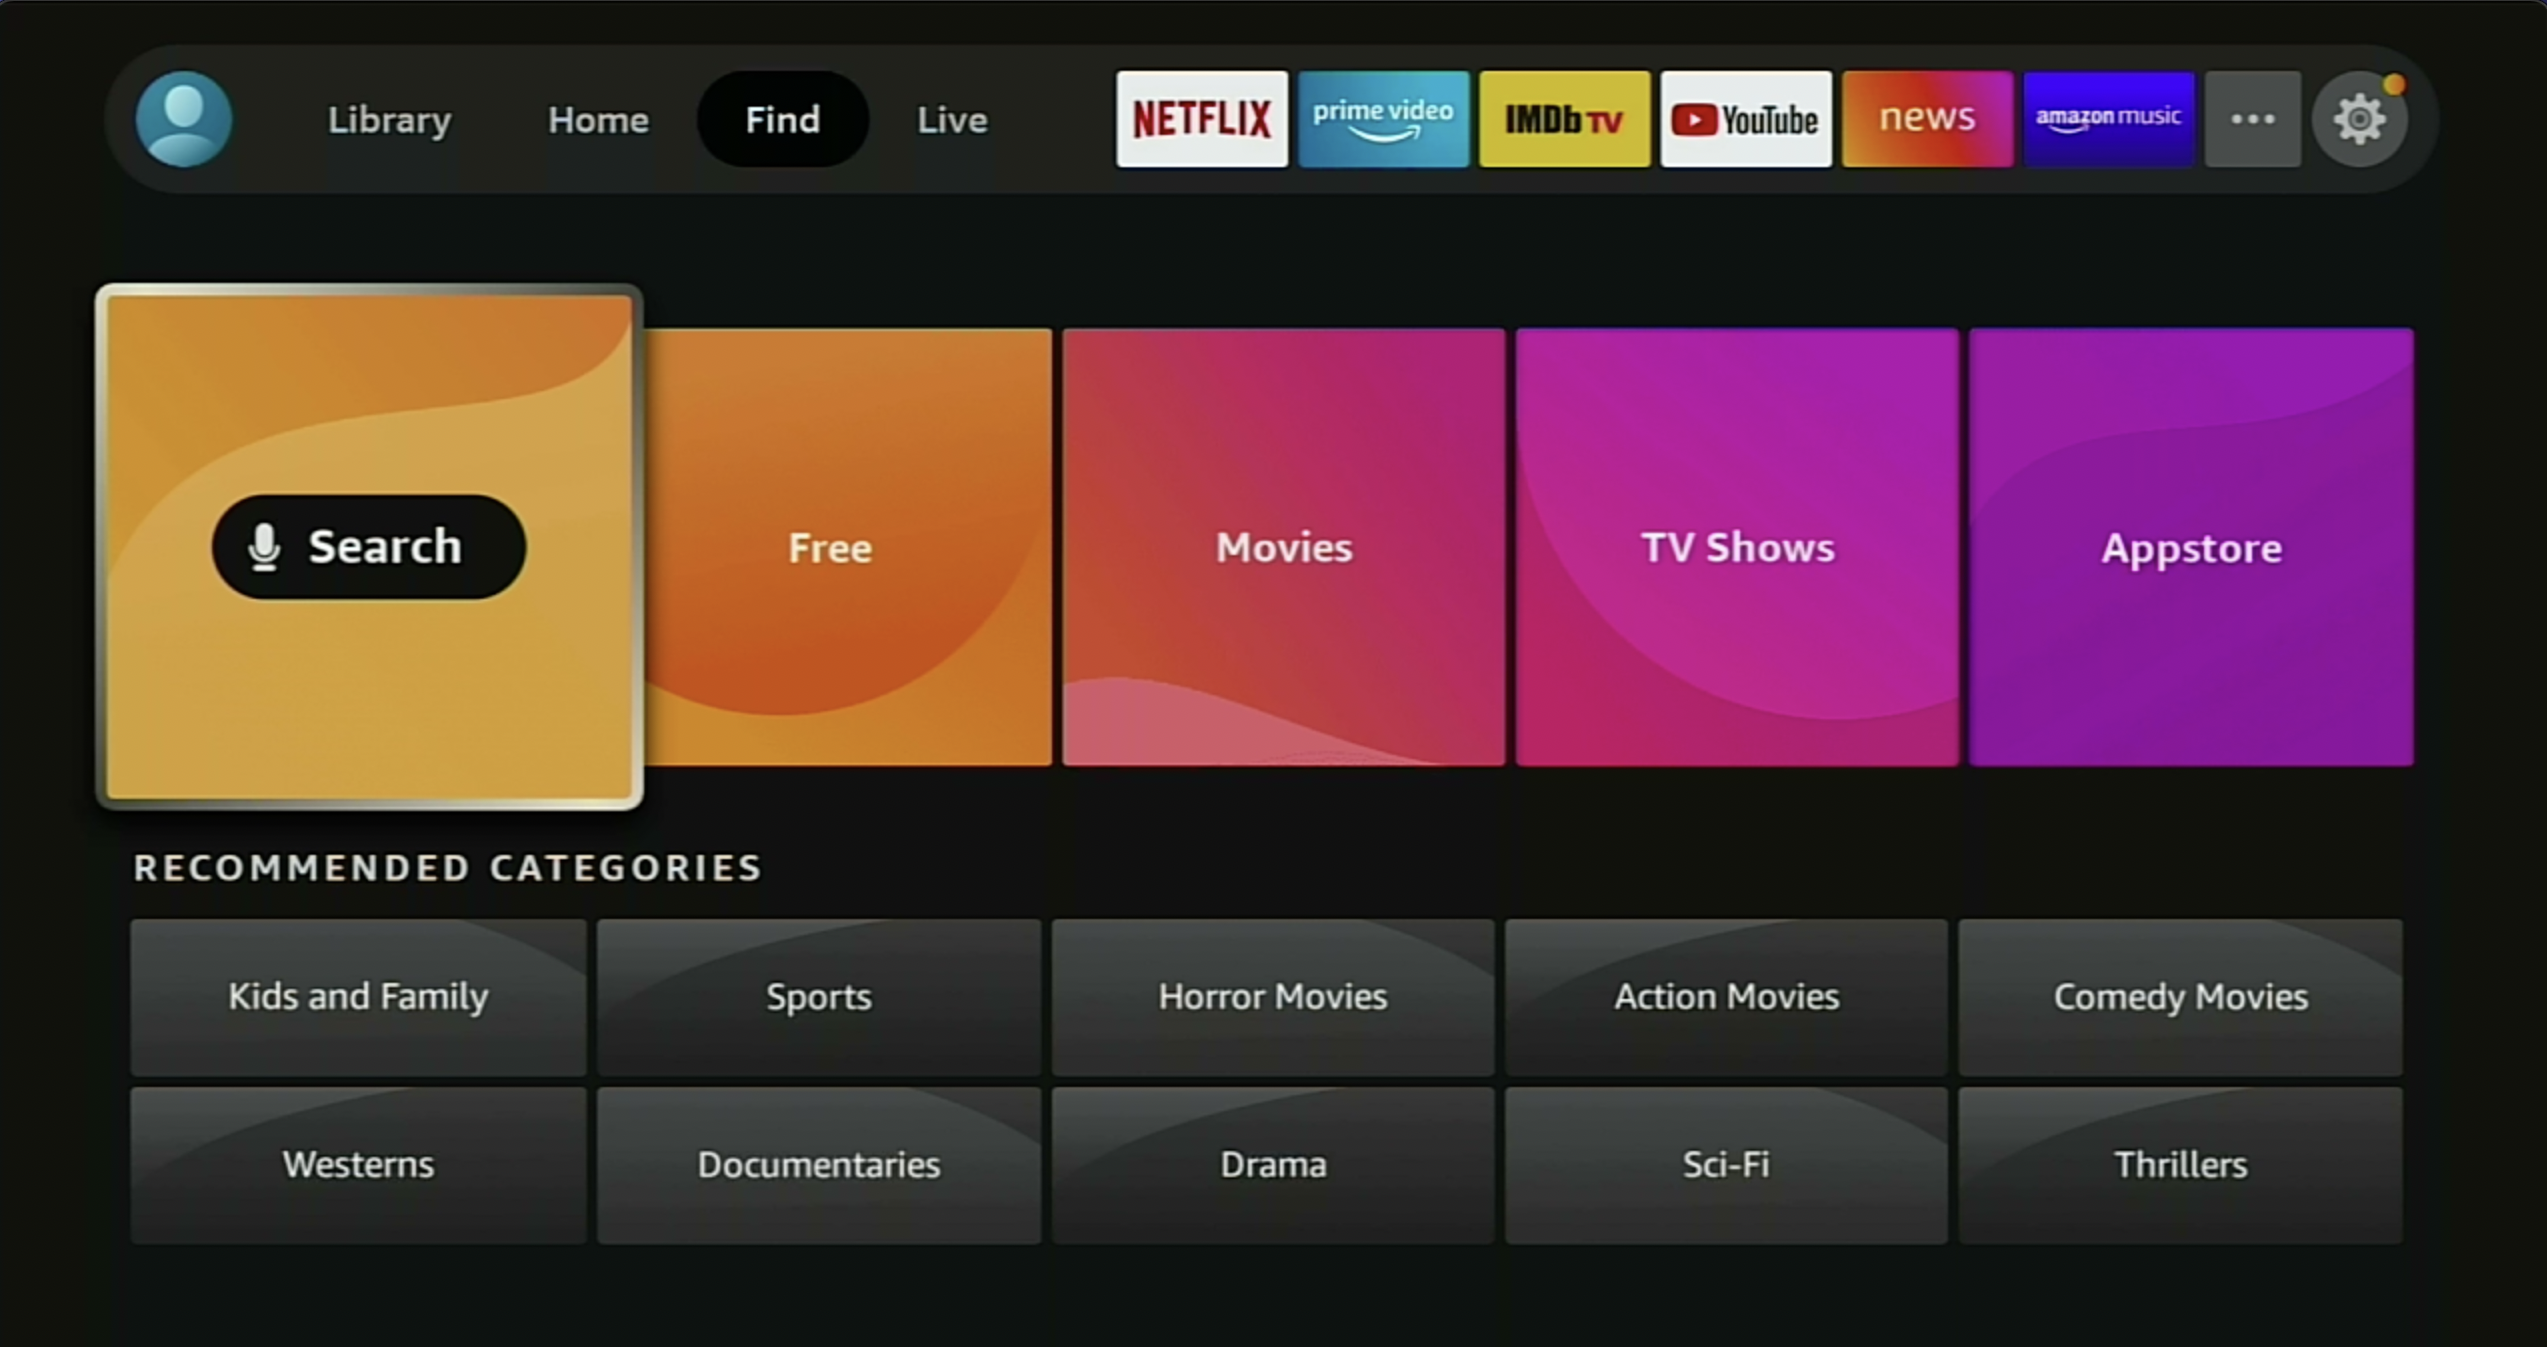 Home screen of an Amazon Fire TV devices with SEARCH highlighted